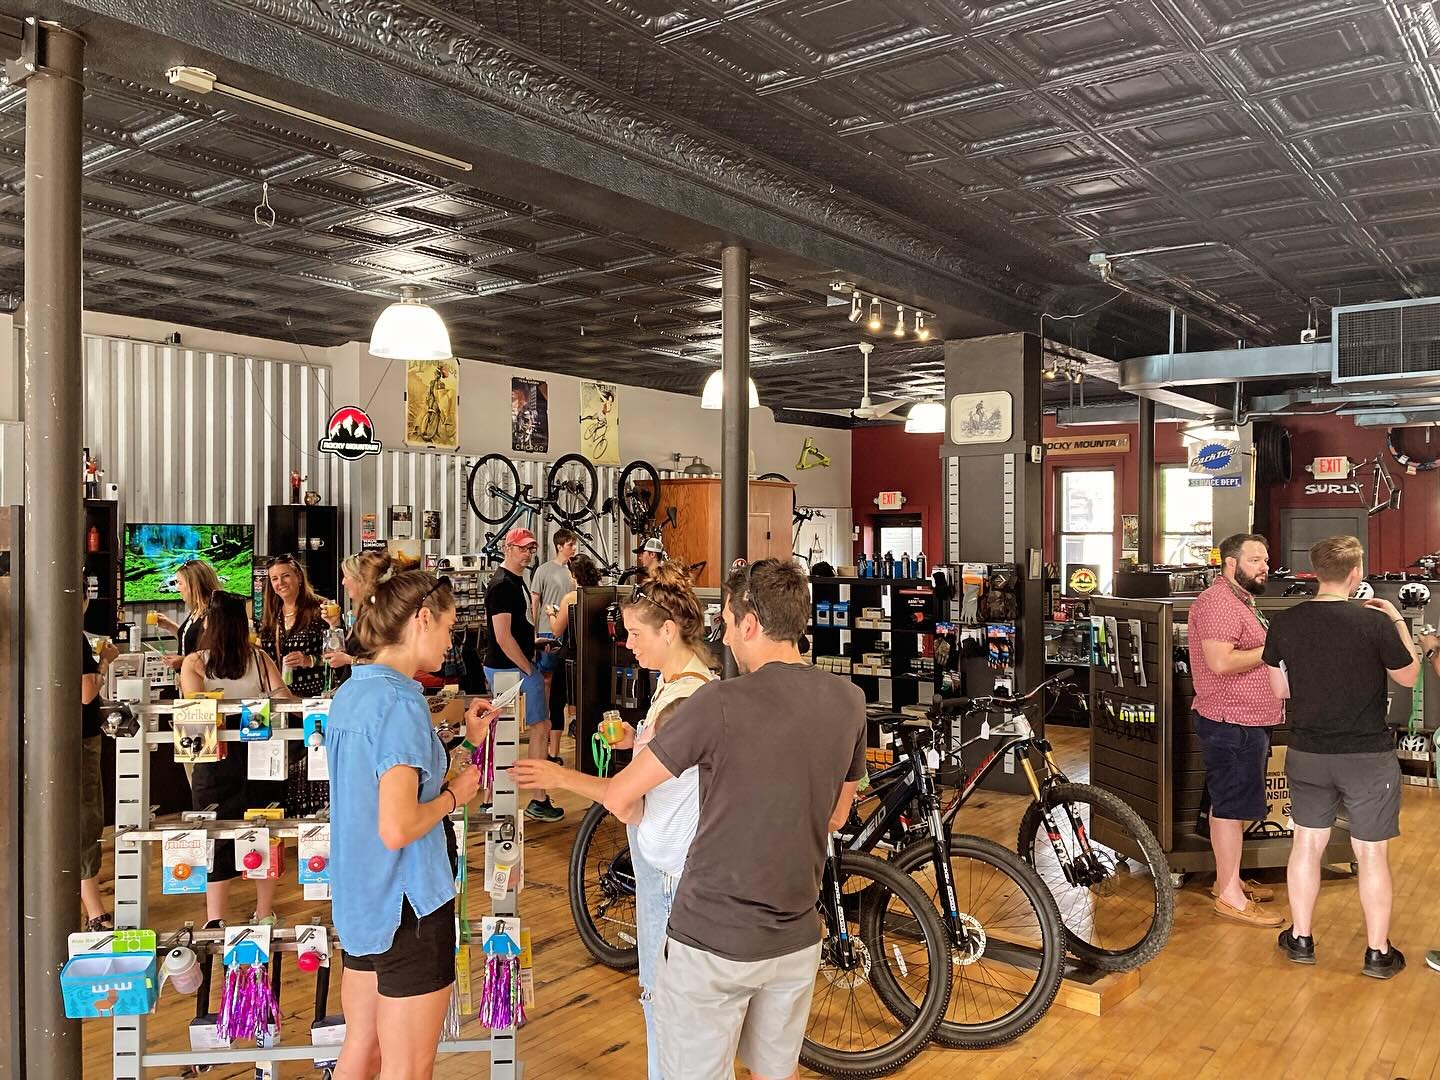 Quite the busy day yesterday!! The crawl was a blast for locals and my two boys were being the best welcoming doormen in town!! We hope everyone enjoys their Sunday! #shoplocal #supportsmallbusiness #localbikeshop #service #sales #ongoing #wegotyouco